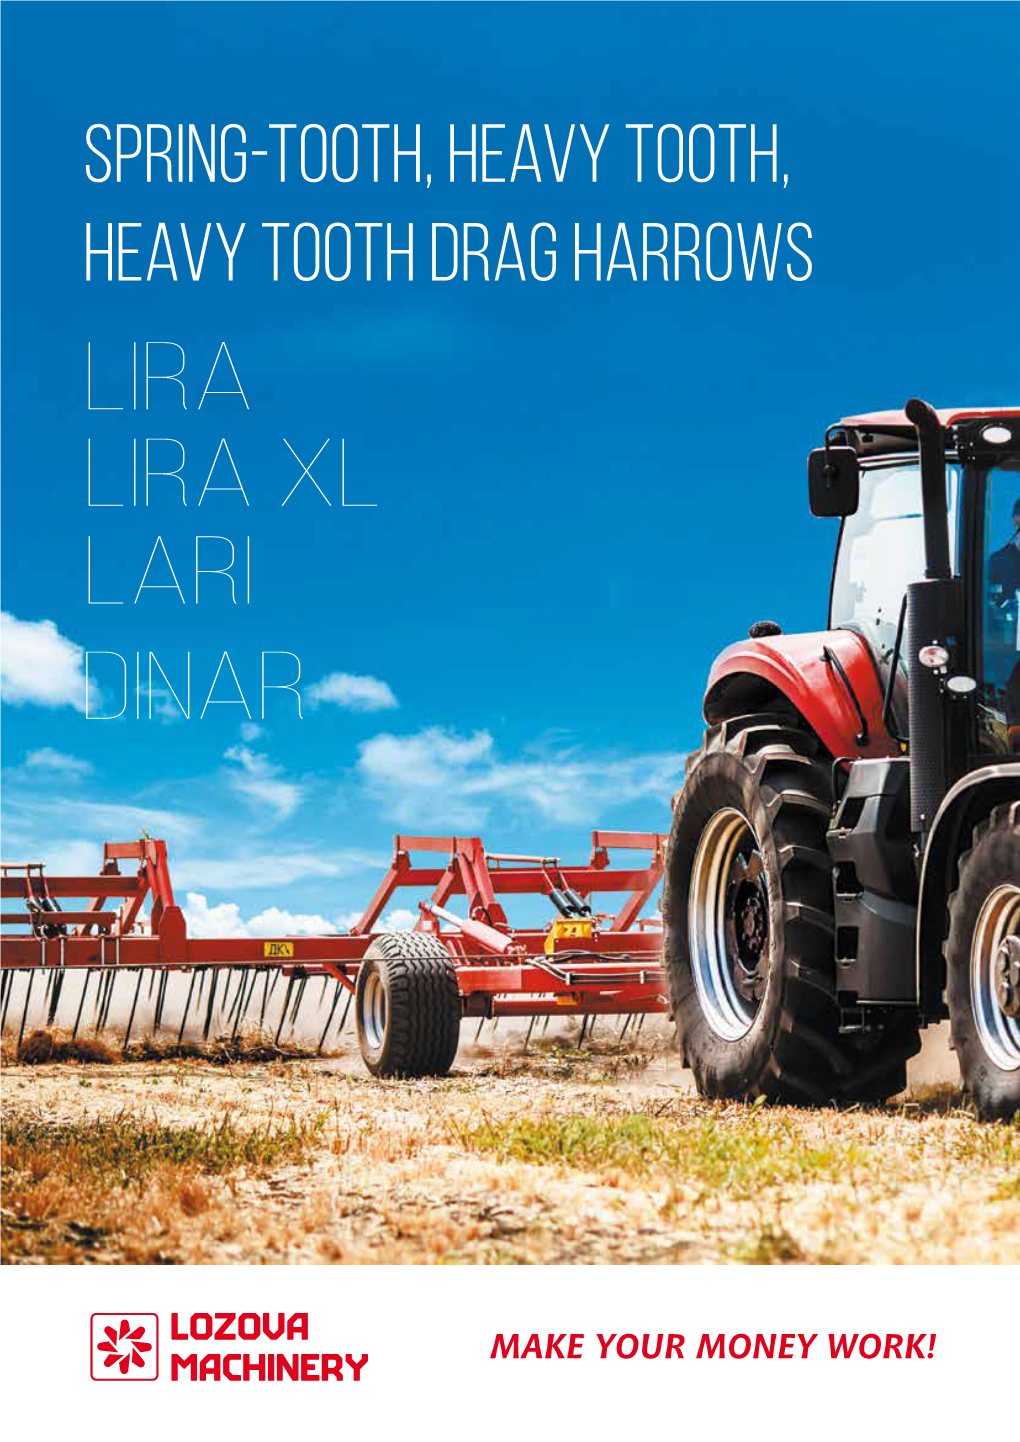 Booklet SPRING-TOOTH, HEAVY TOOTH, HEAVY TOOTH DRAG